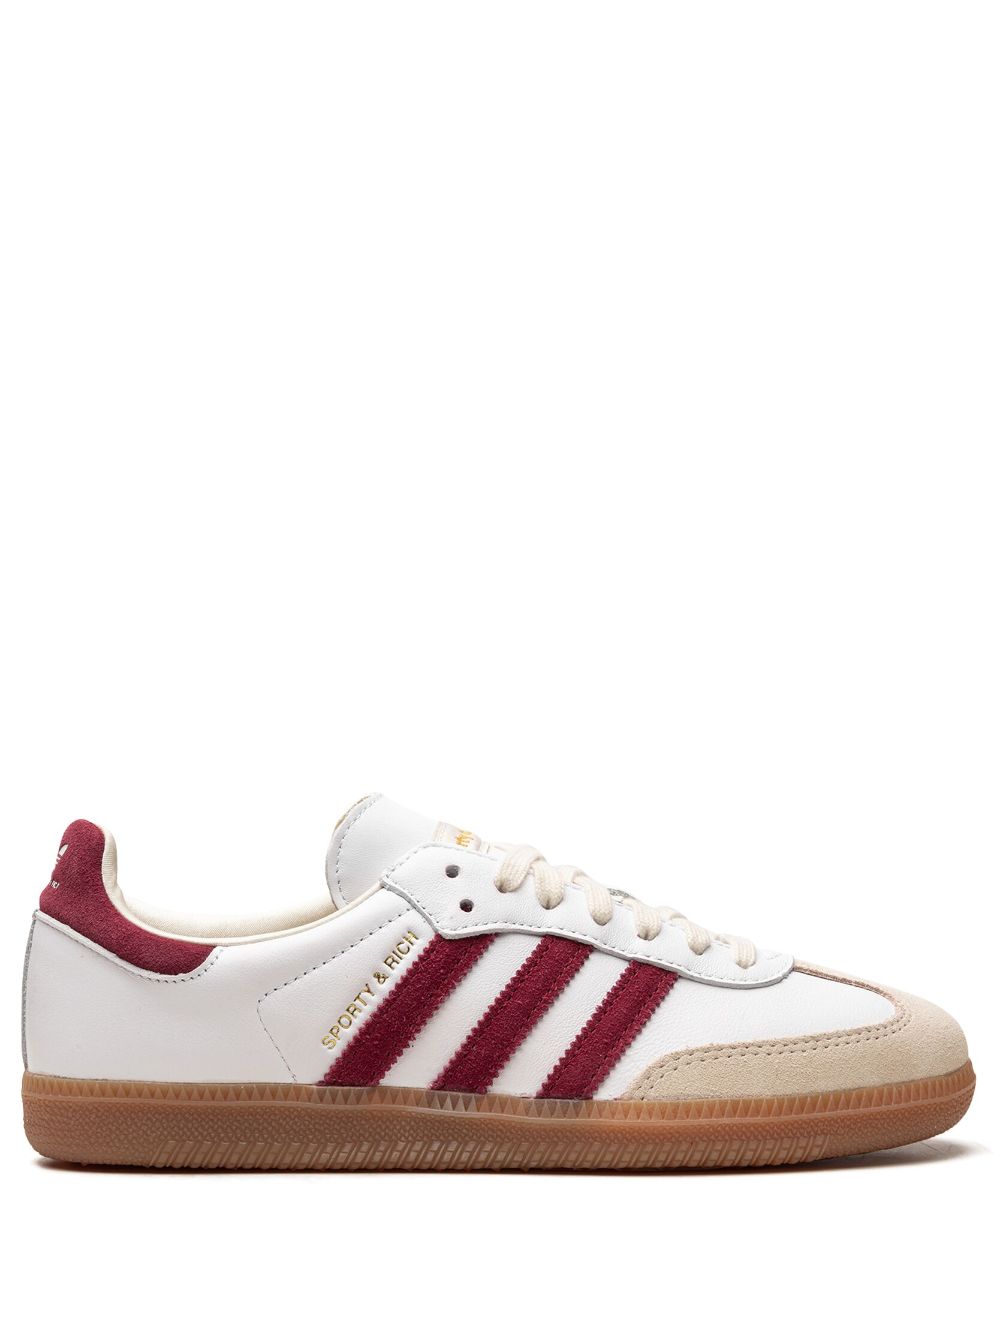 Image 1 of adidas x Sporty & Rich Samba OG sneakers